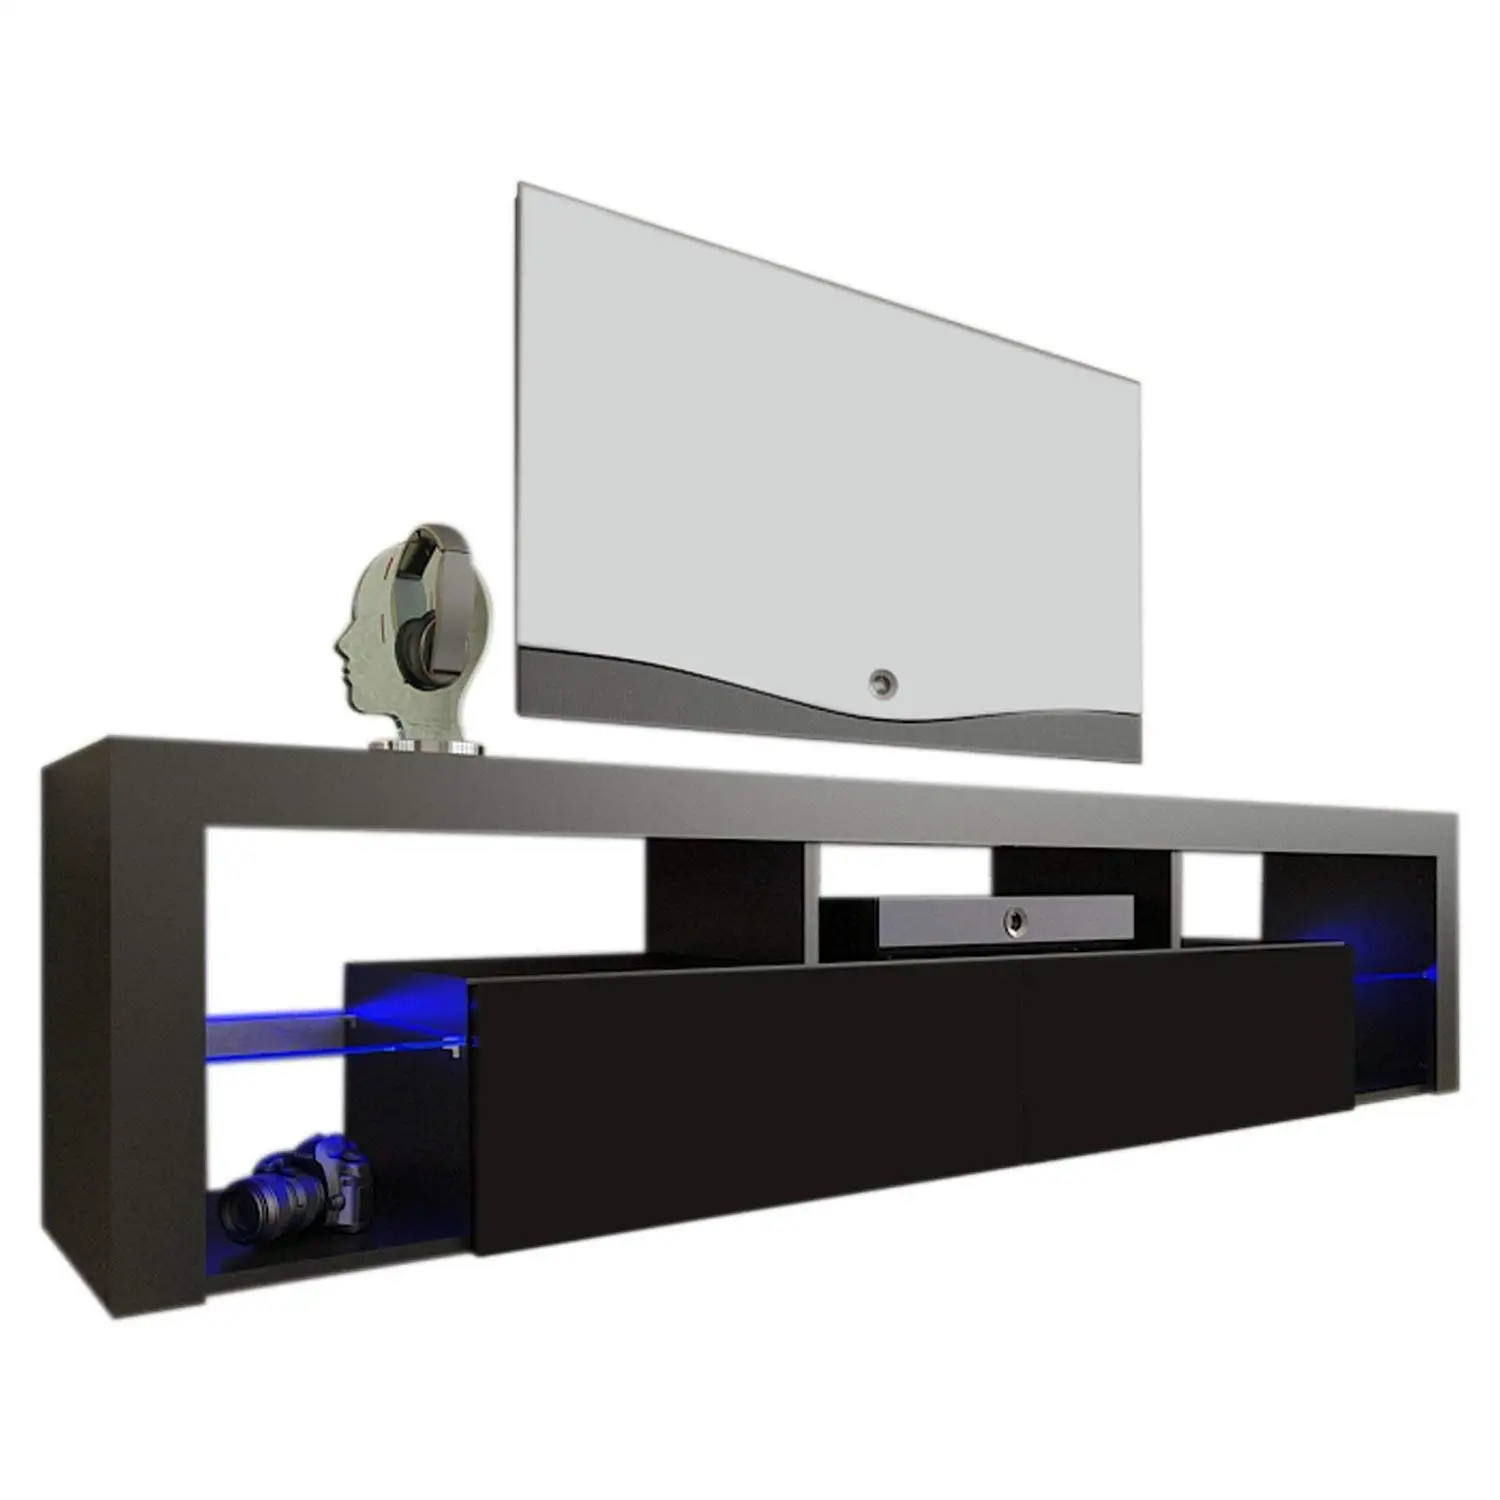 Buy Domovero Helios 250 Modern Wall Mounted TV Stand ...